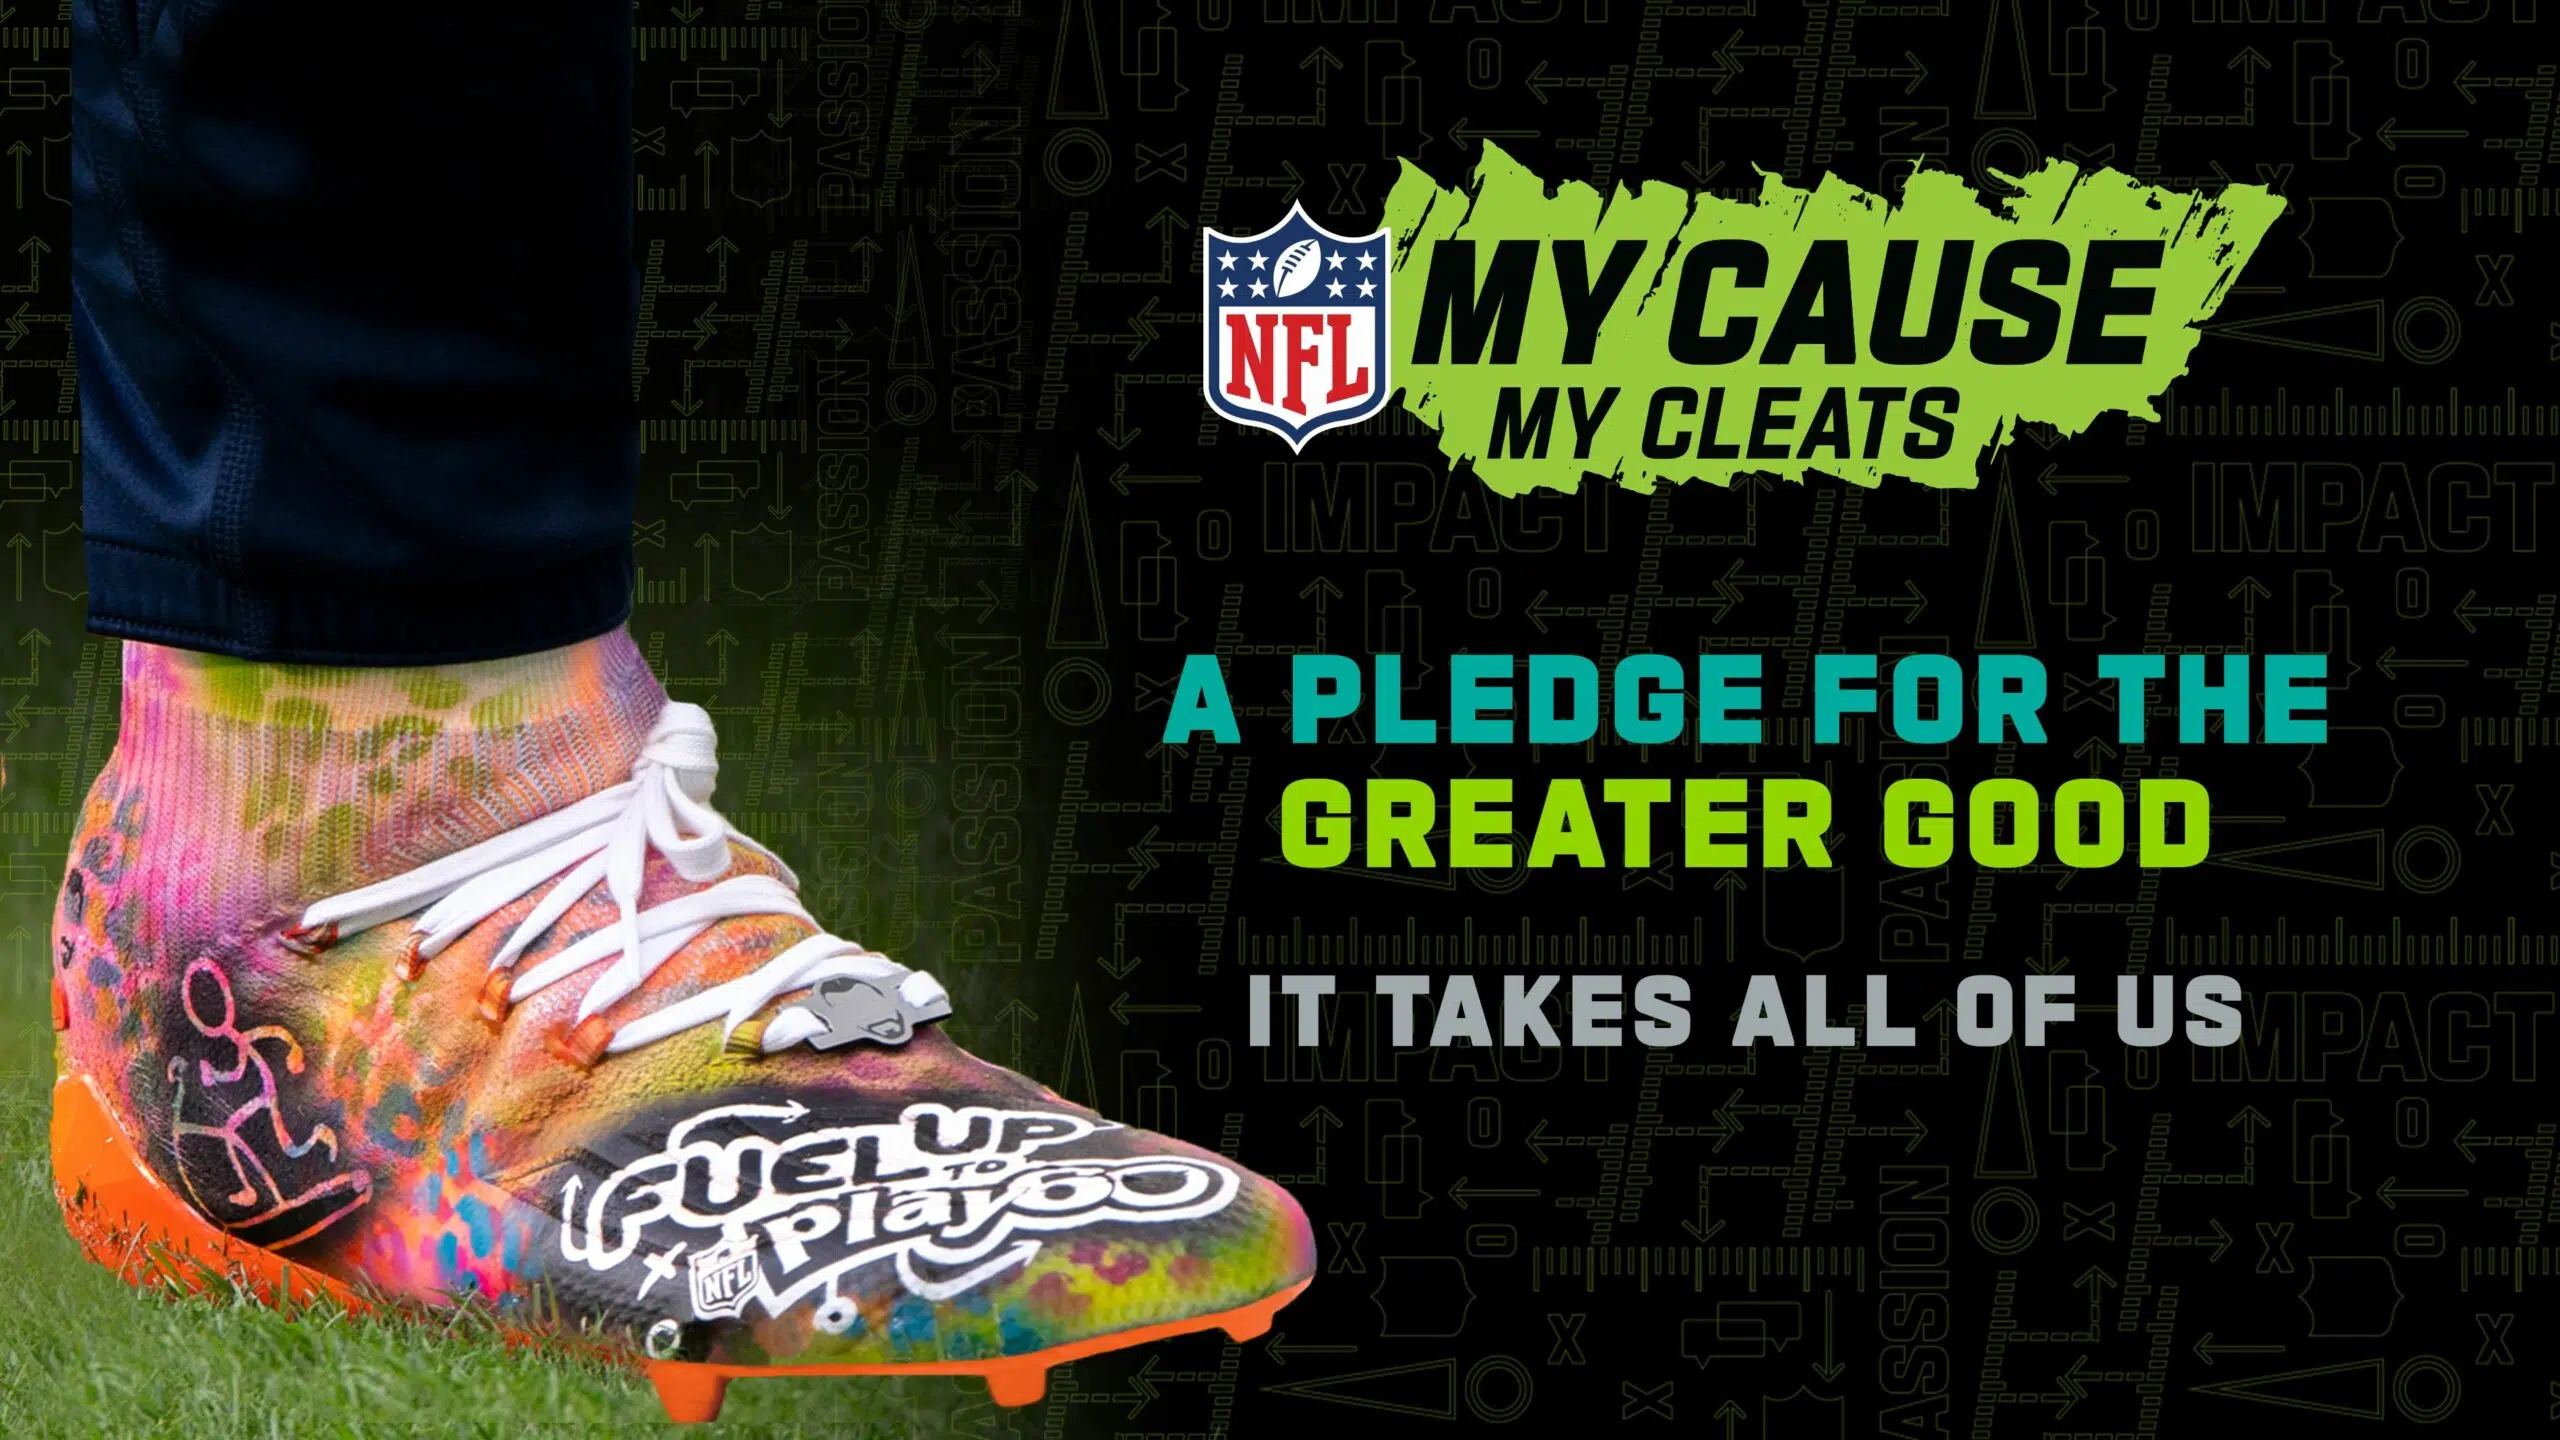 Nfl players highlight causes on-field through sixth season of my cause my cleats